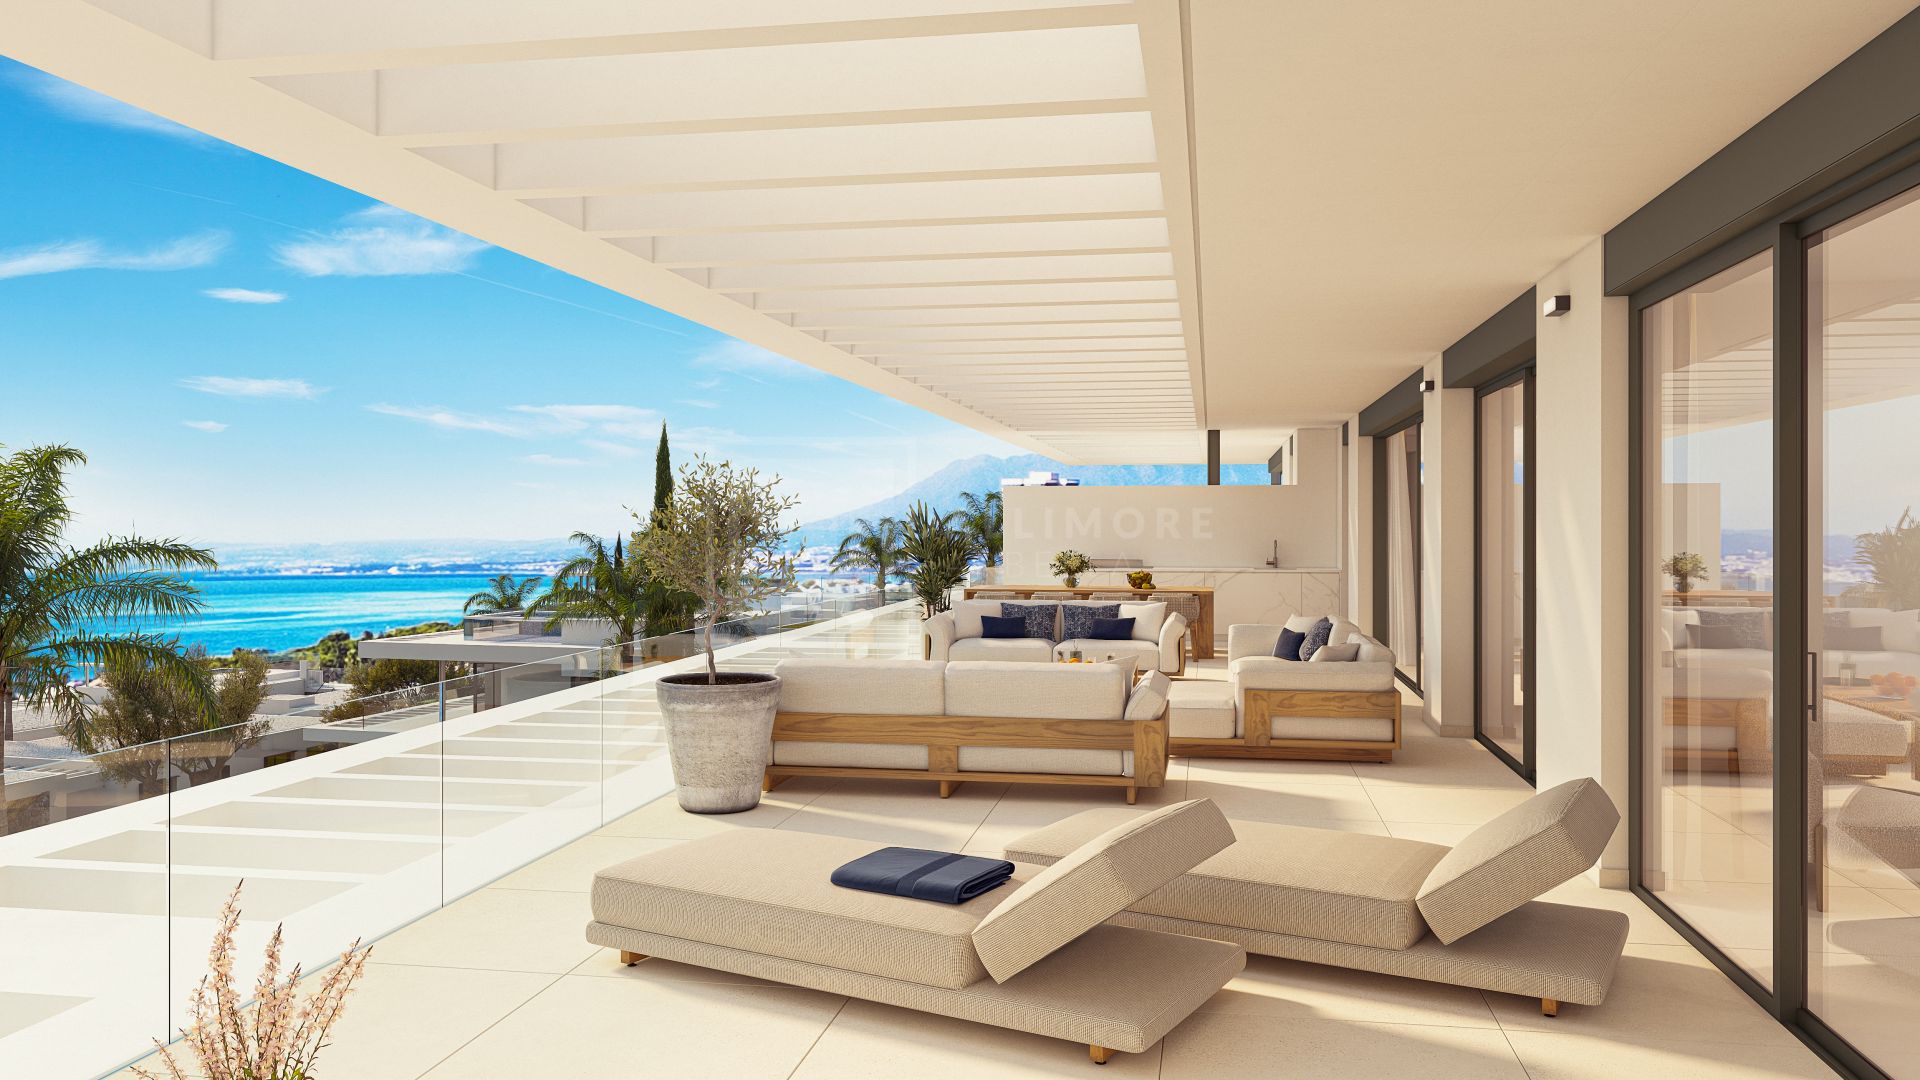 STUNNING BRAND NEW 4-BEDROOM CONTEMPORARY DUPLEX APARTMENT WITH SEA VIEWS EAST OF MARBELLA